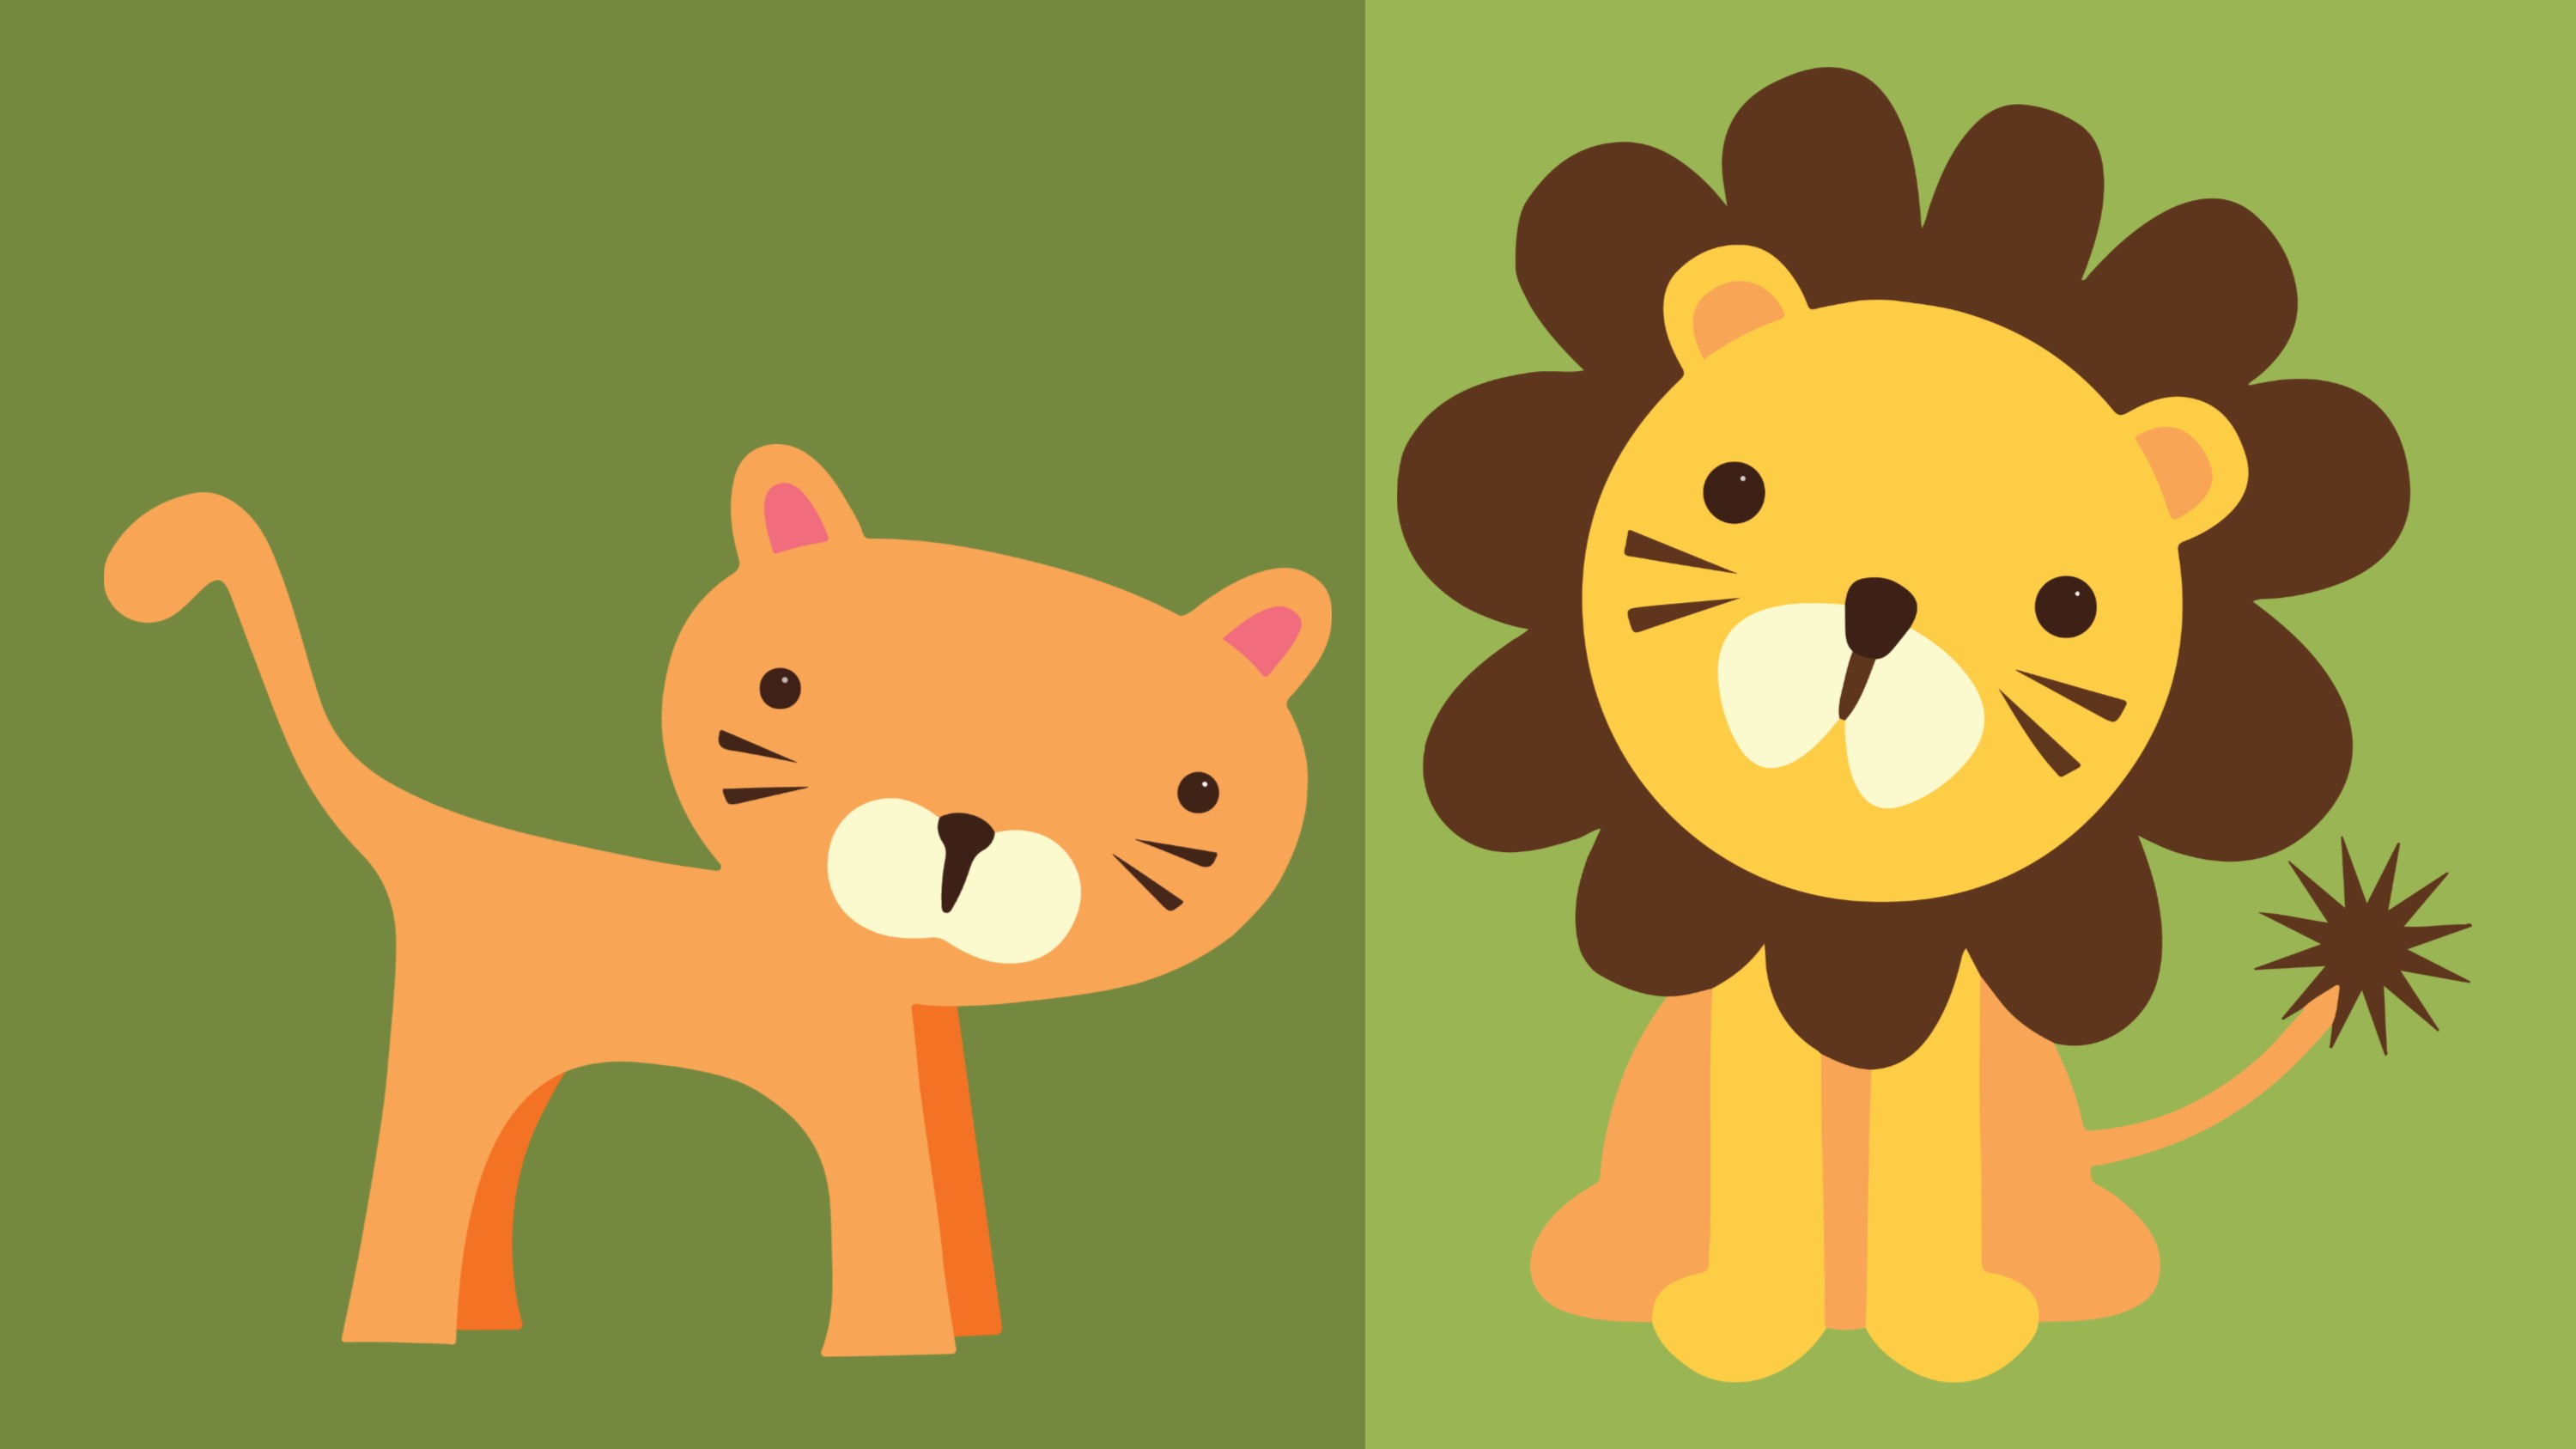 Toy tiger and lion on green background